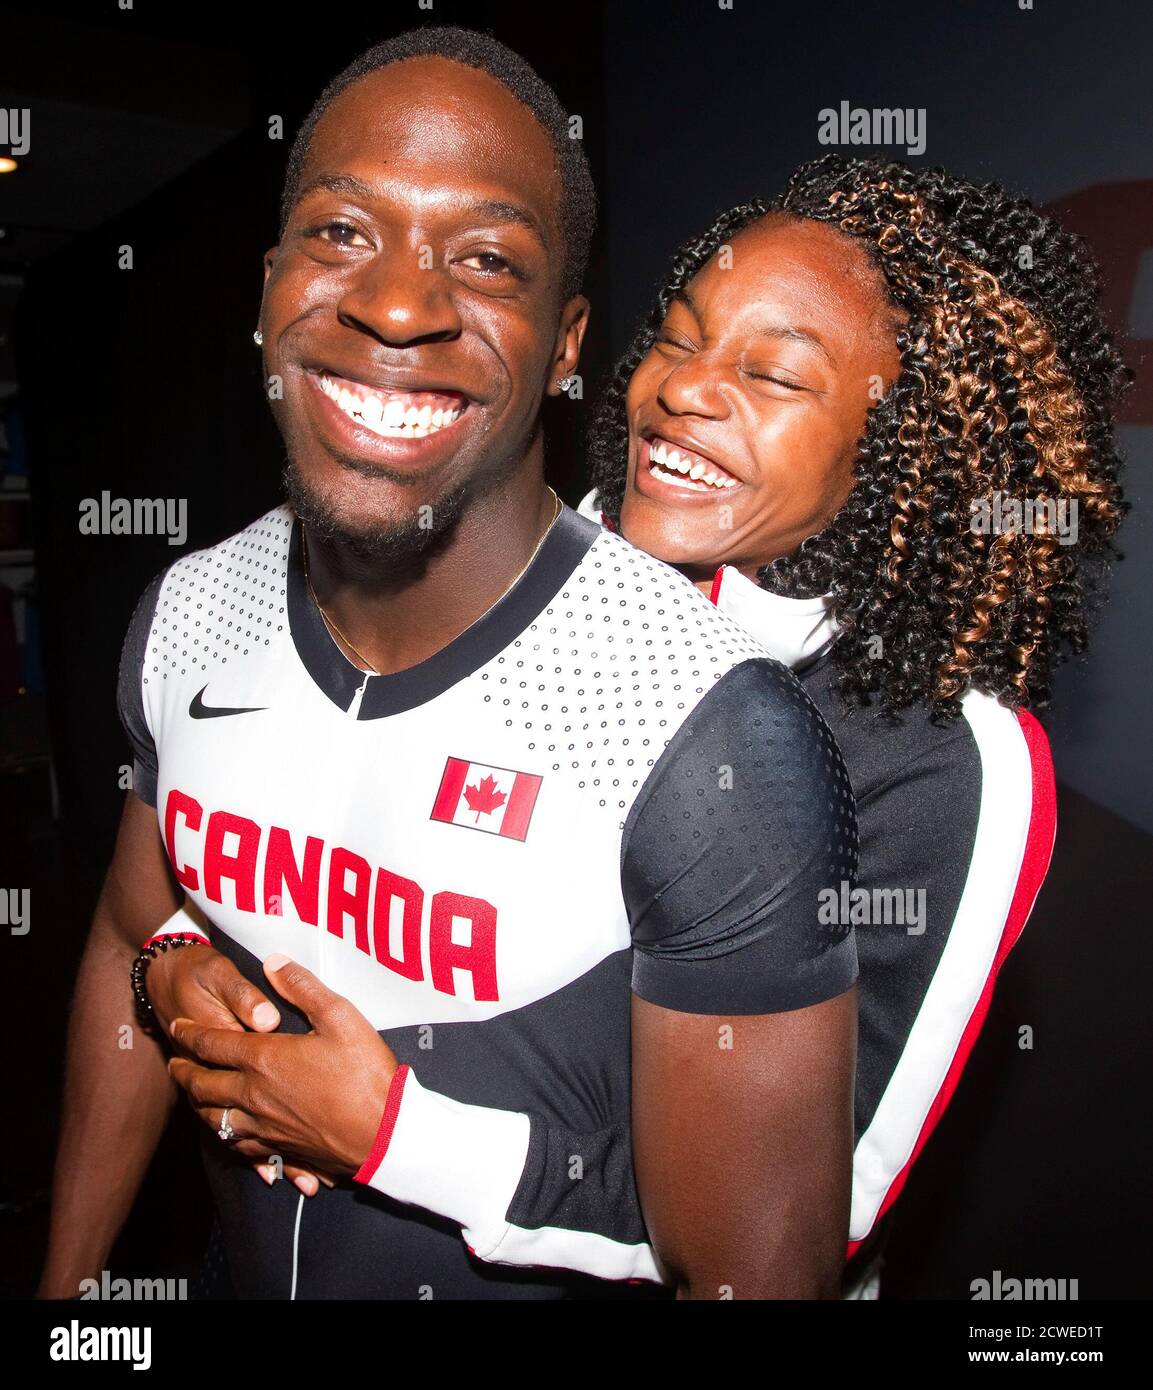 Canadian Olympic athlete Justyn Warner and his fiancee Olympic athlete  Nikkita Holder (R) are pictured at a press conference held by Nike and  Athletics Canada to unveil Canadian Olympic team apparel in